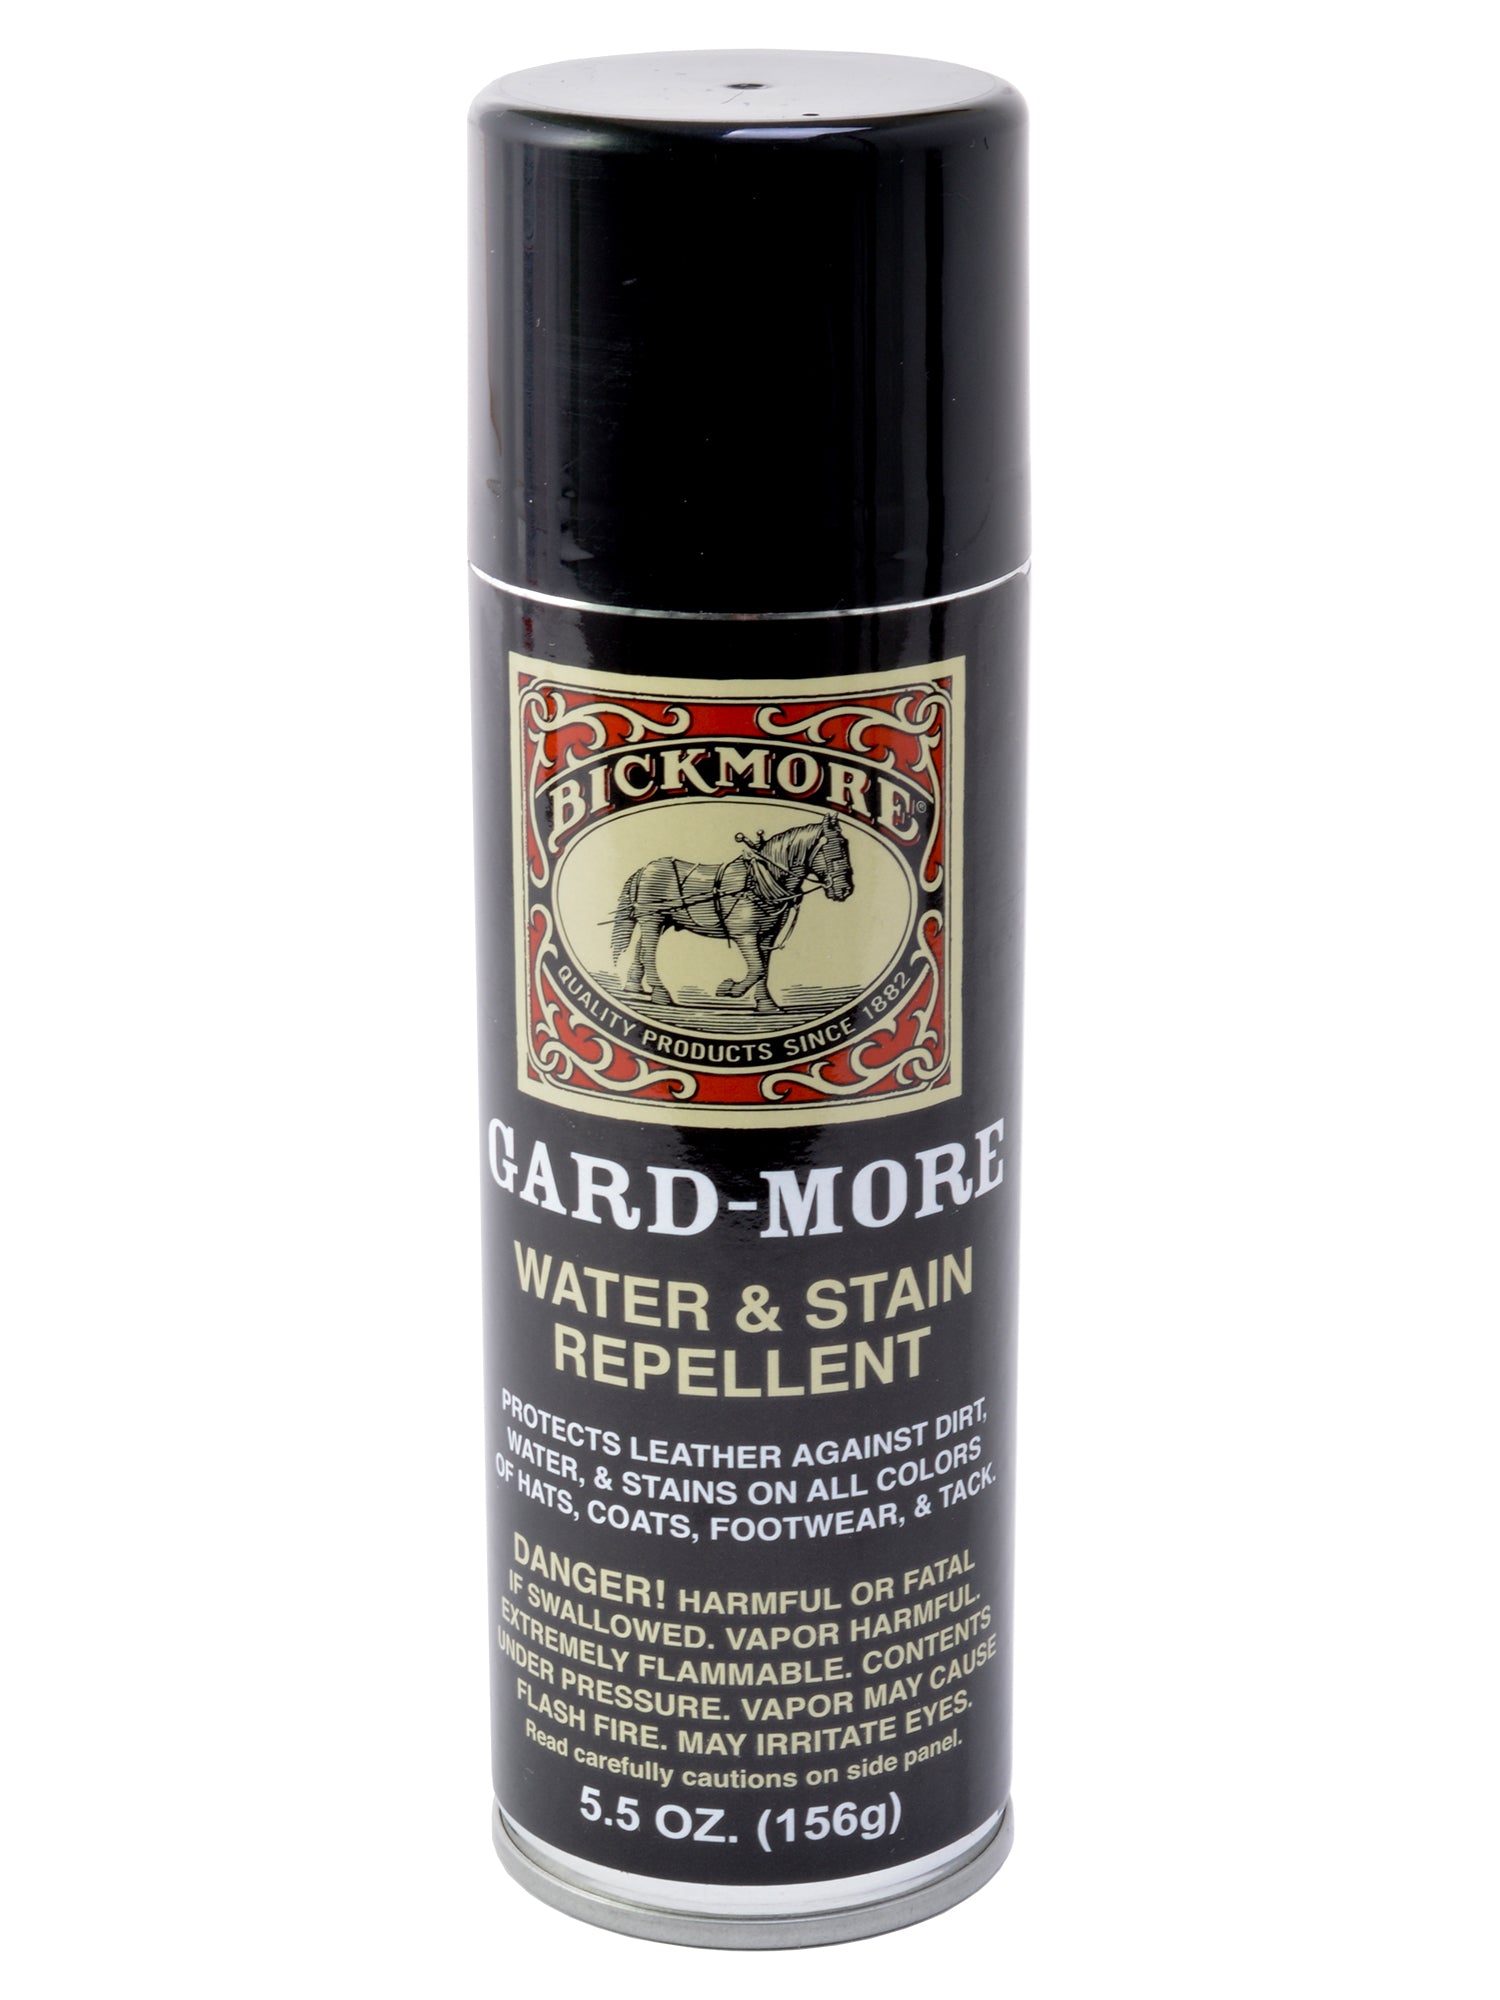 Bickmore Water & Stain Repellent